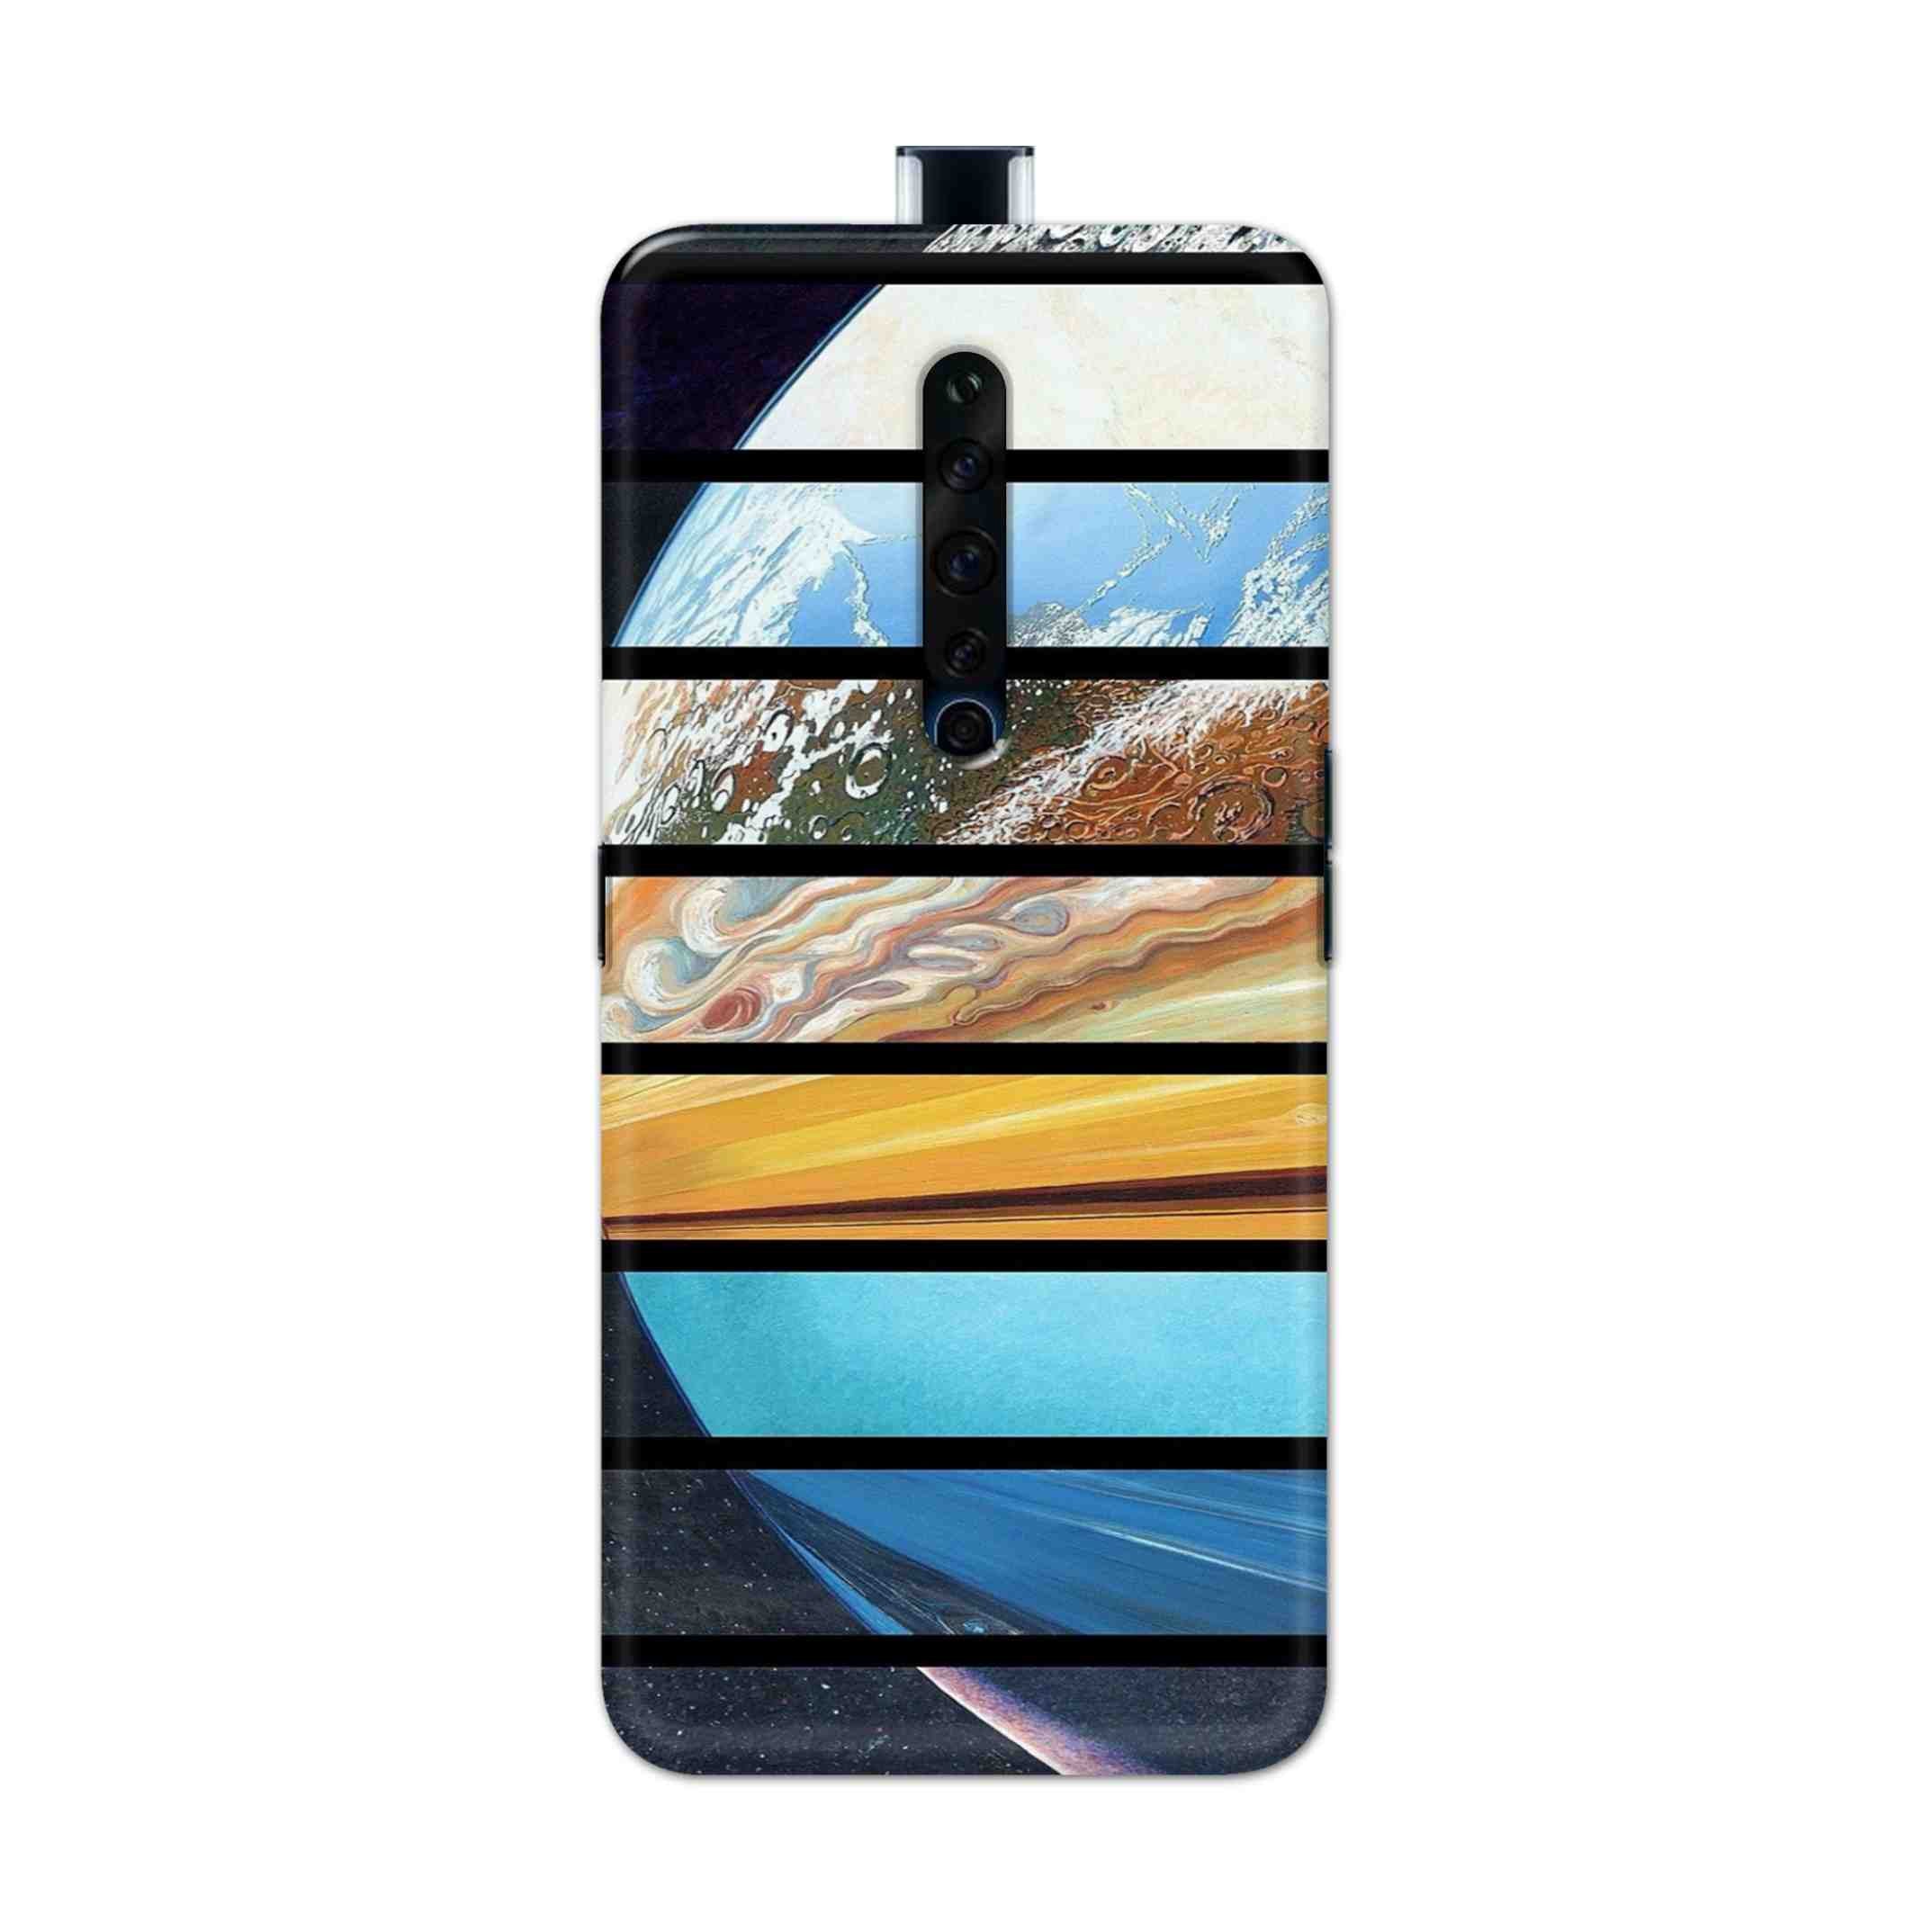 Buy Colourful Earth Hard Back Mobile Phone Case Cover For Oppo Reno 2Z Online